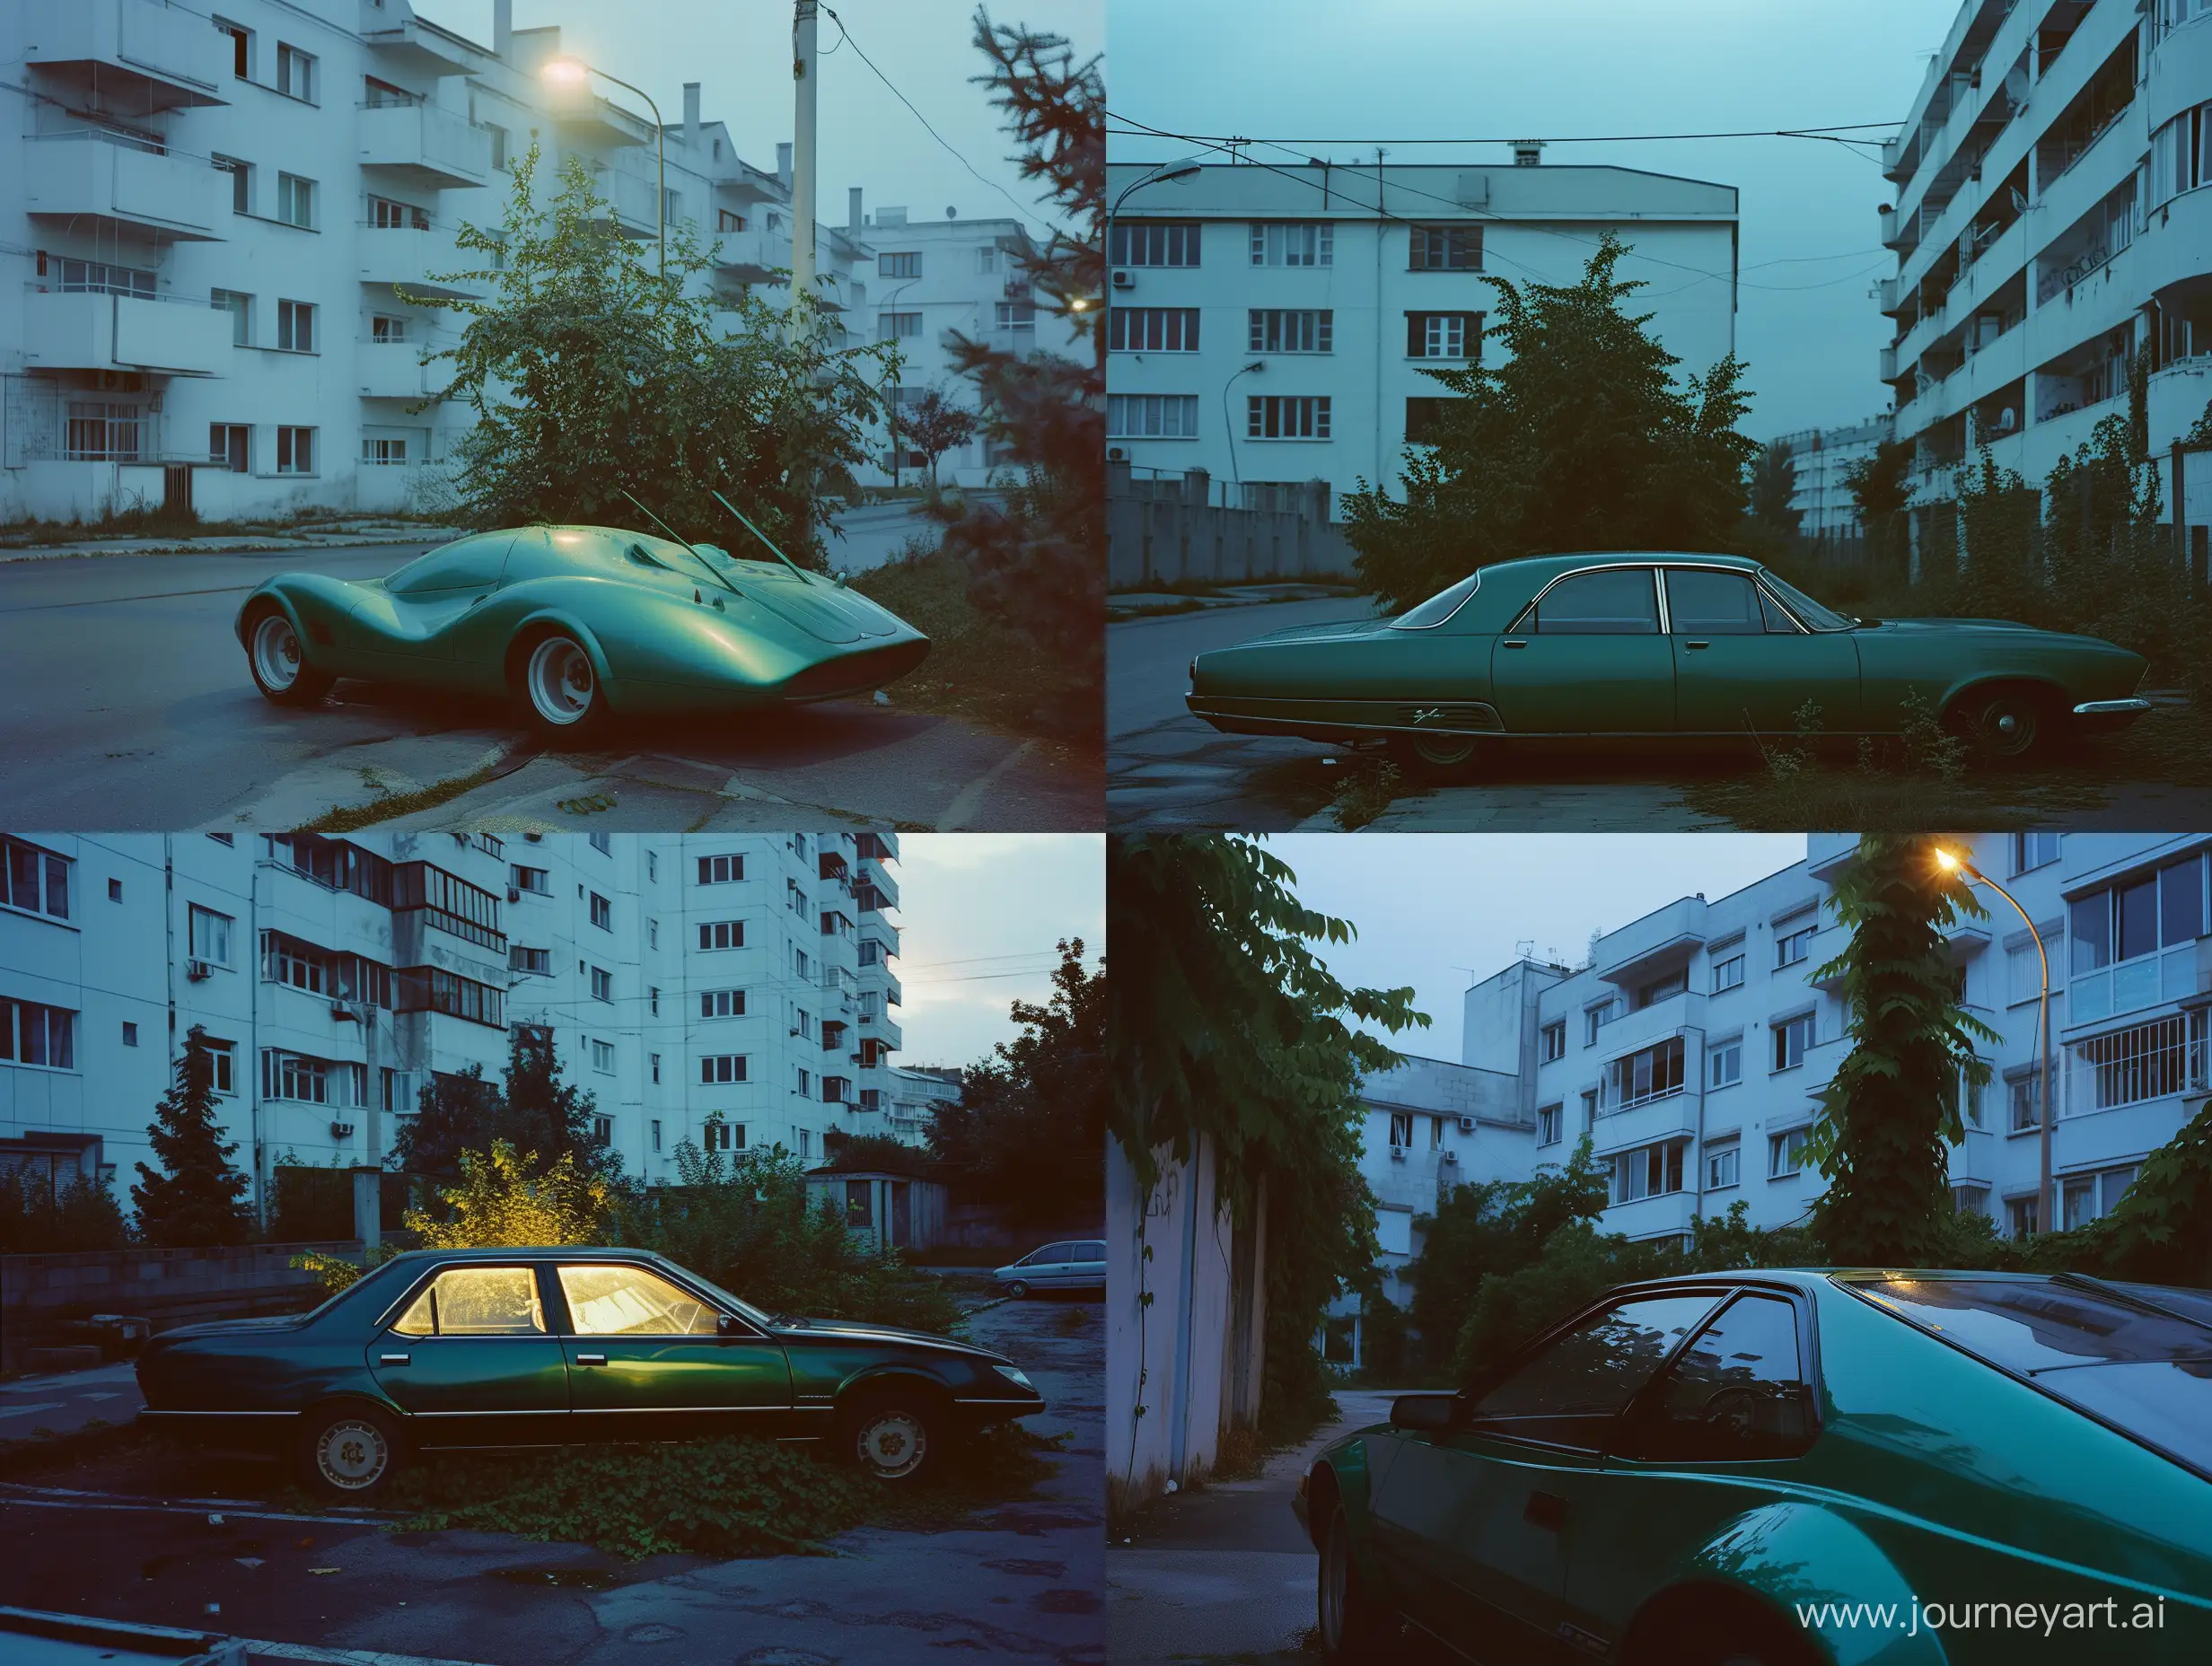 Liminal-Space-Aesthetics-Retro-Car-on-Residential-Street-at-Dawn